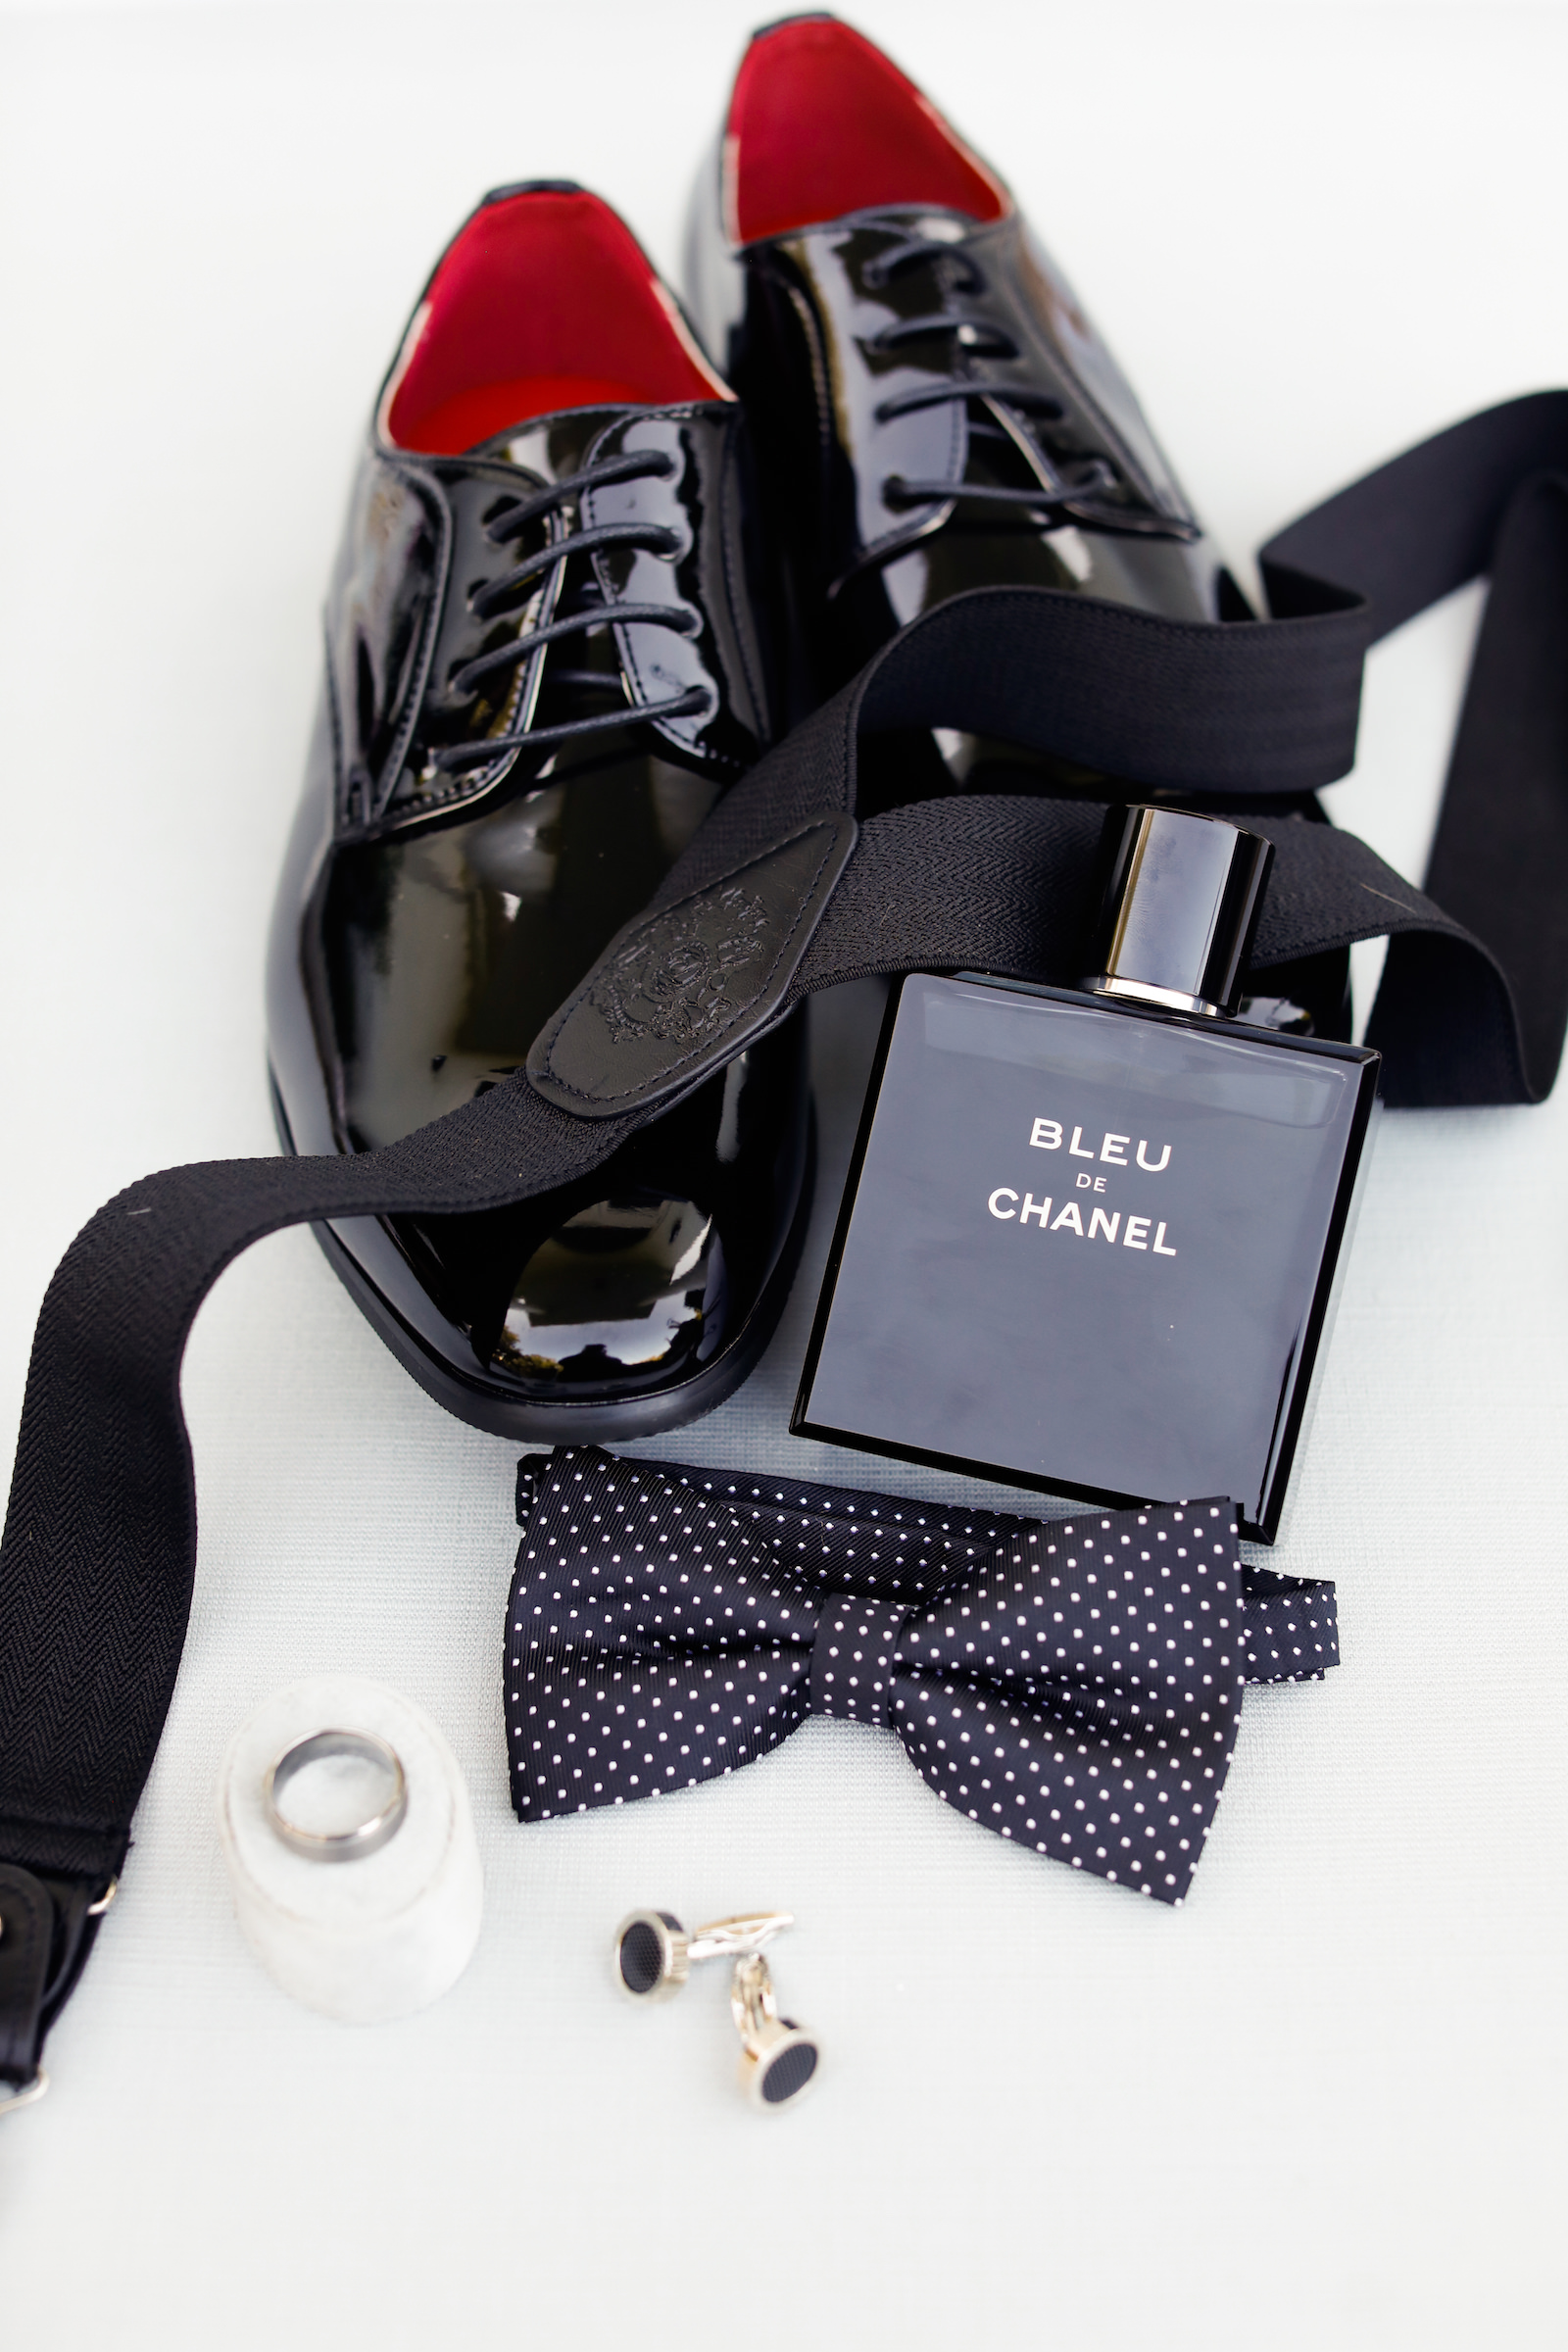 Groom Black Shoes and Bow Tie with Chanel Cologne